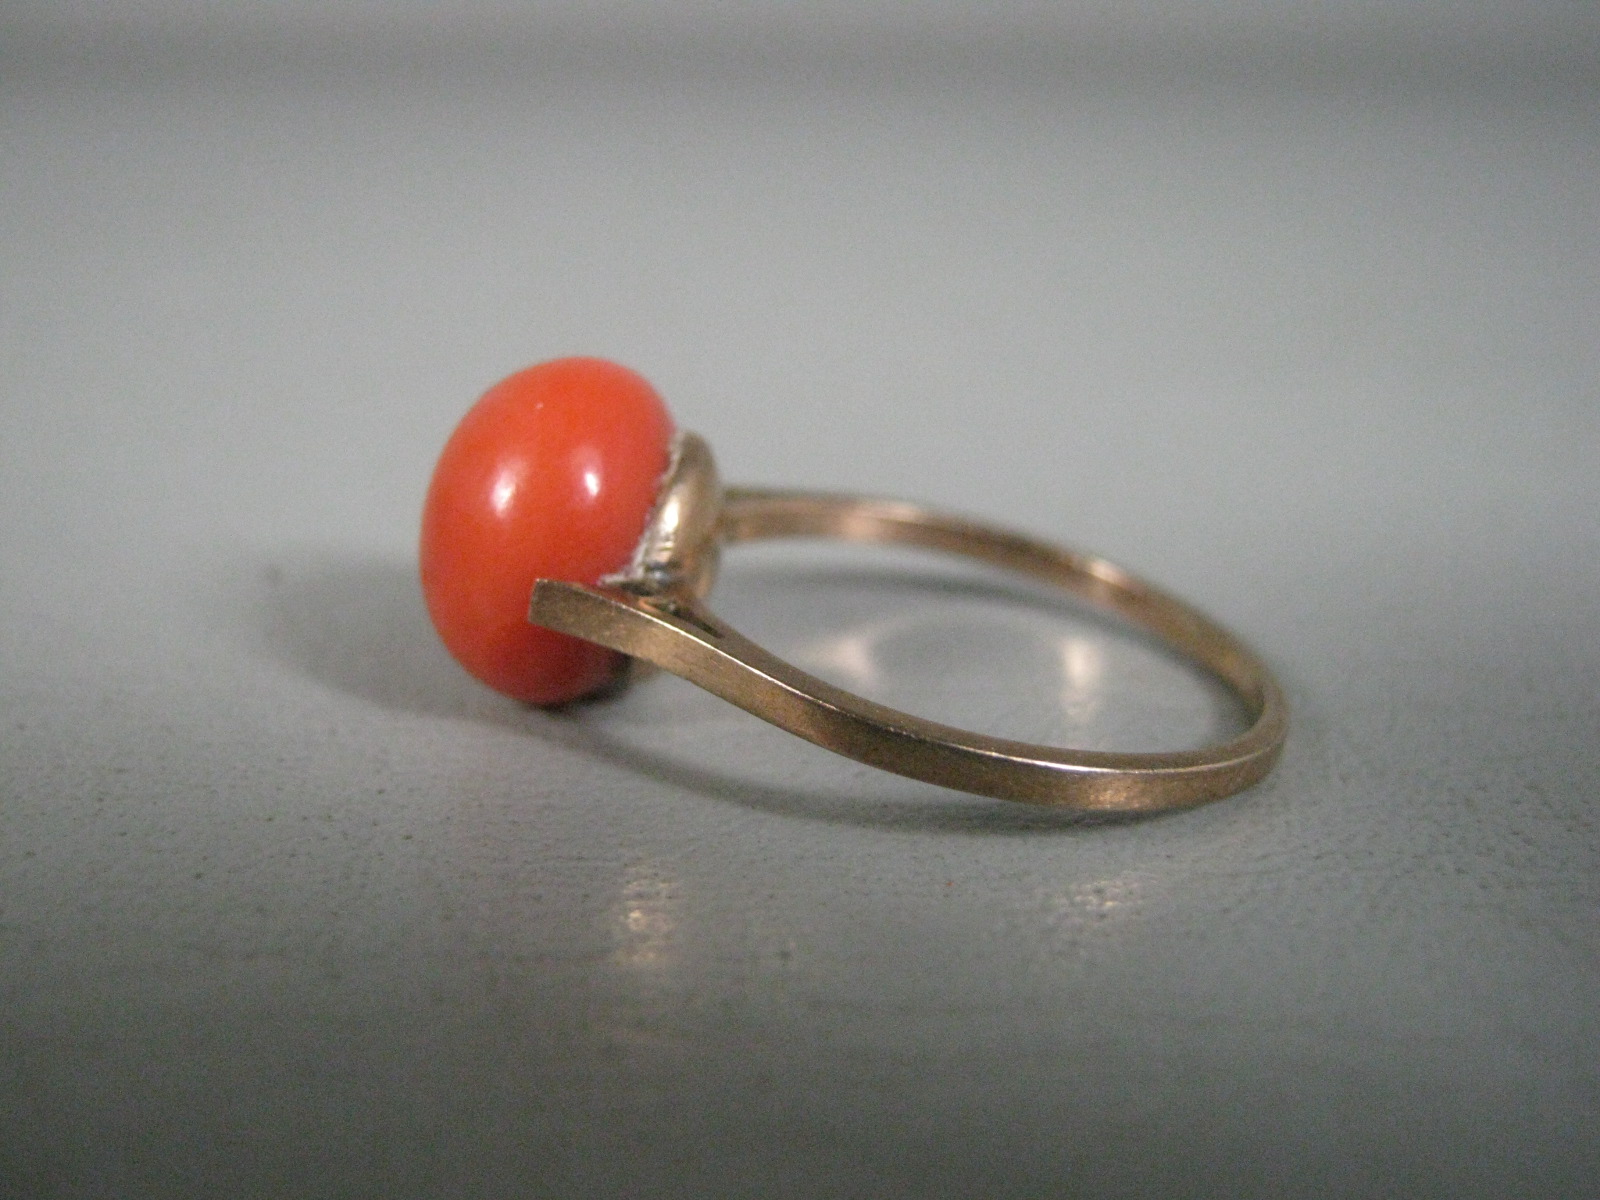 Vtg Antique 585 14K 14 Karat Yellow Gold Red Coral Ring Size 7 Estate Jewelry NR 2